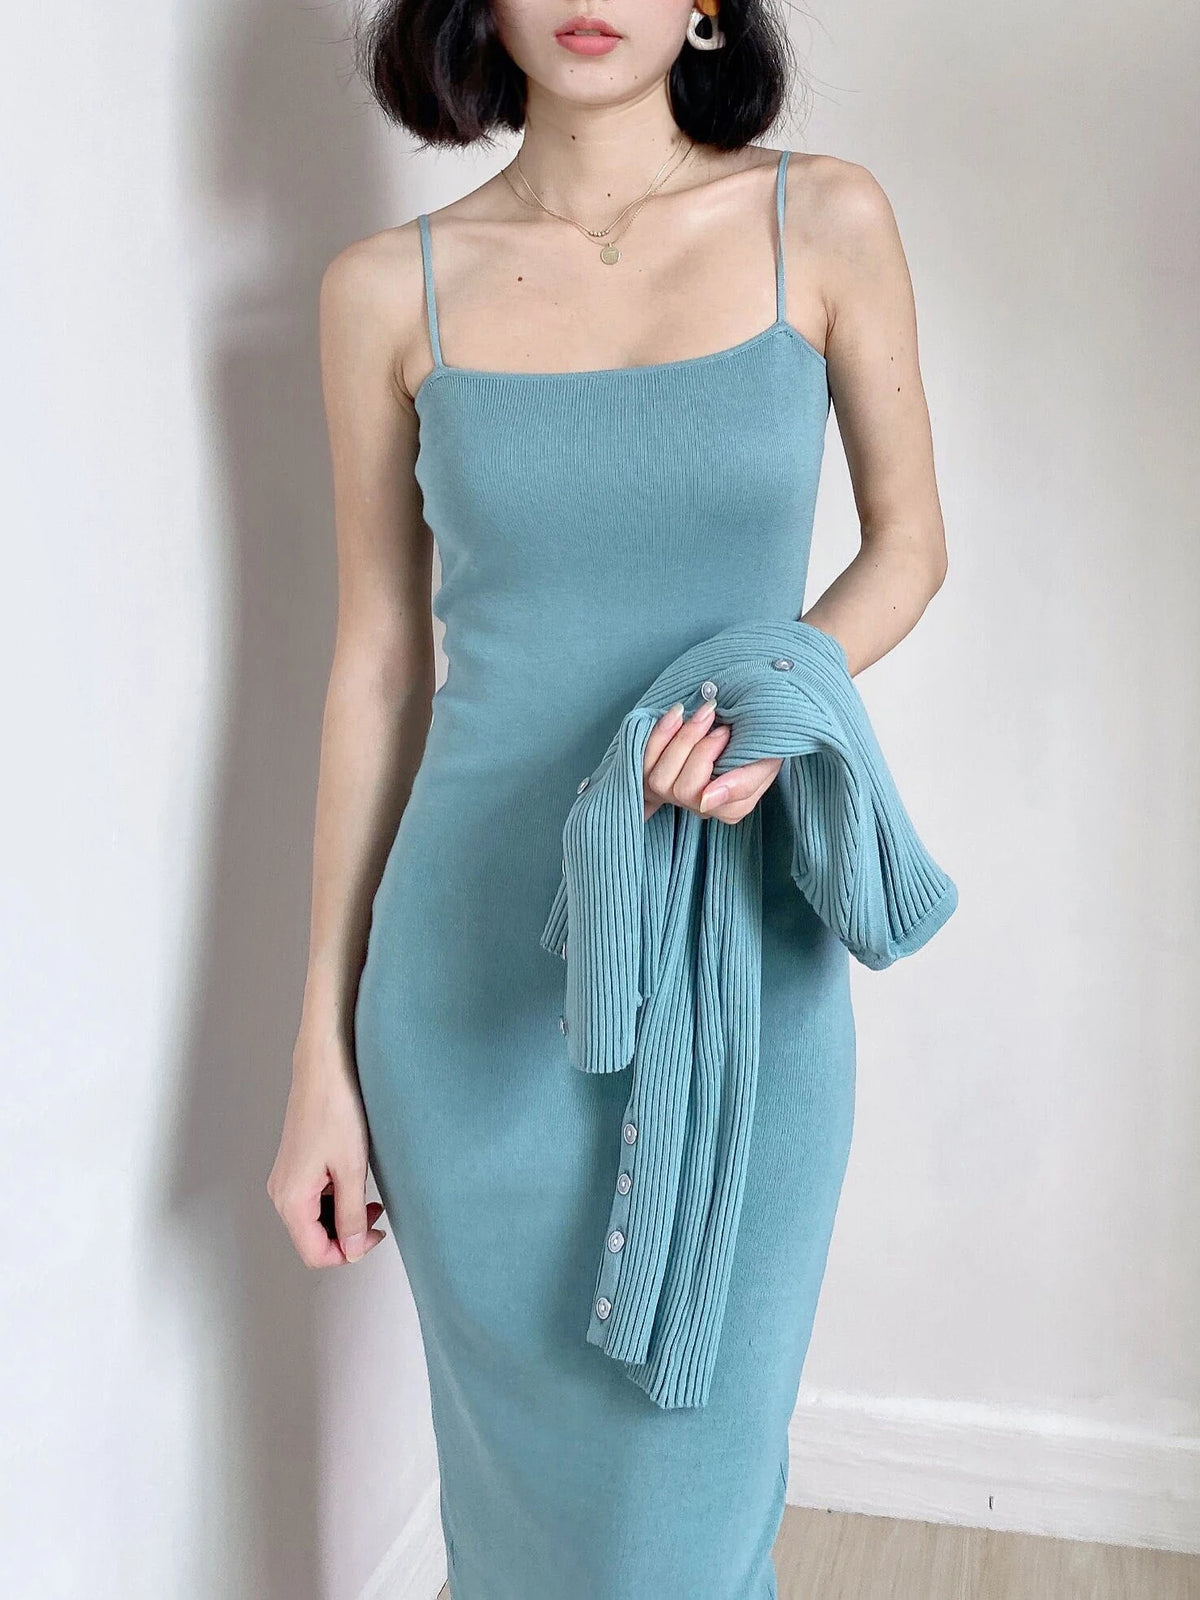 Women Bodycon 2 Piece Dress Set Spaghetti Strap Slim Knit Dress Long Sleeve Button Cardigan Suits Fashion Solid Outfits C-113